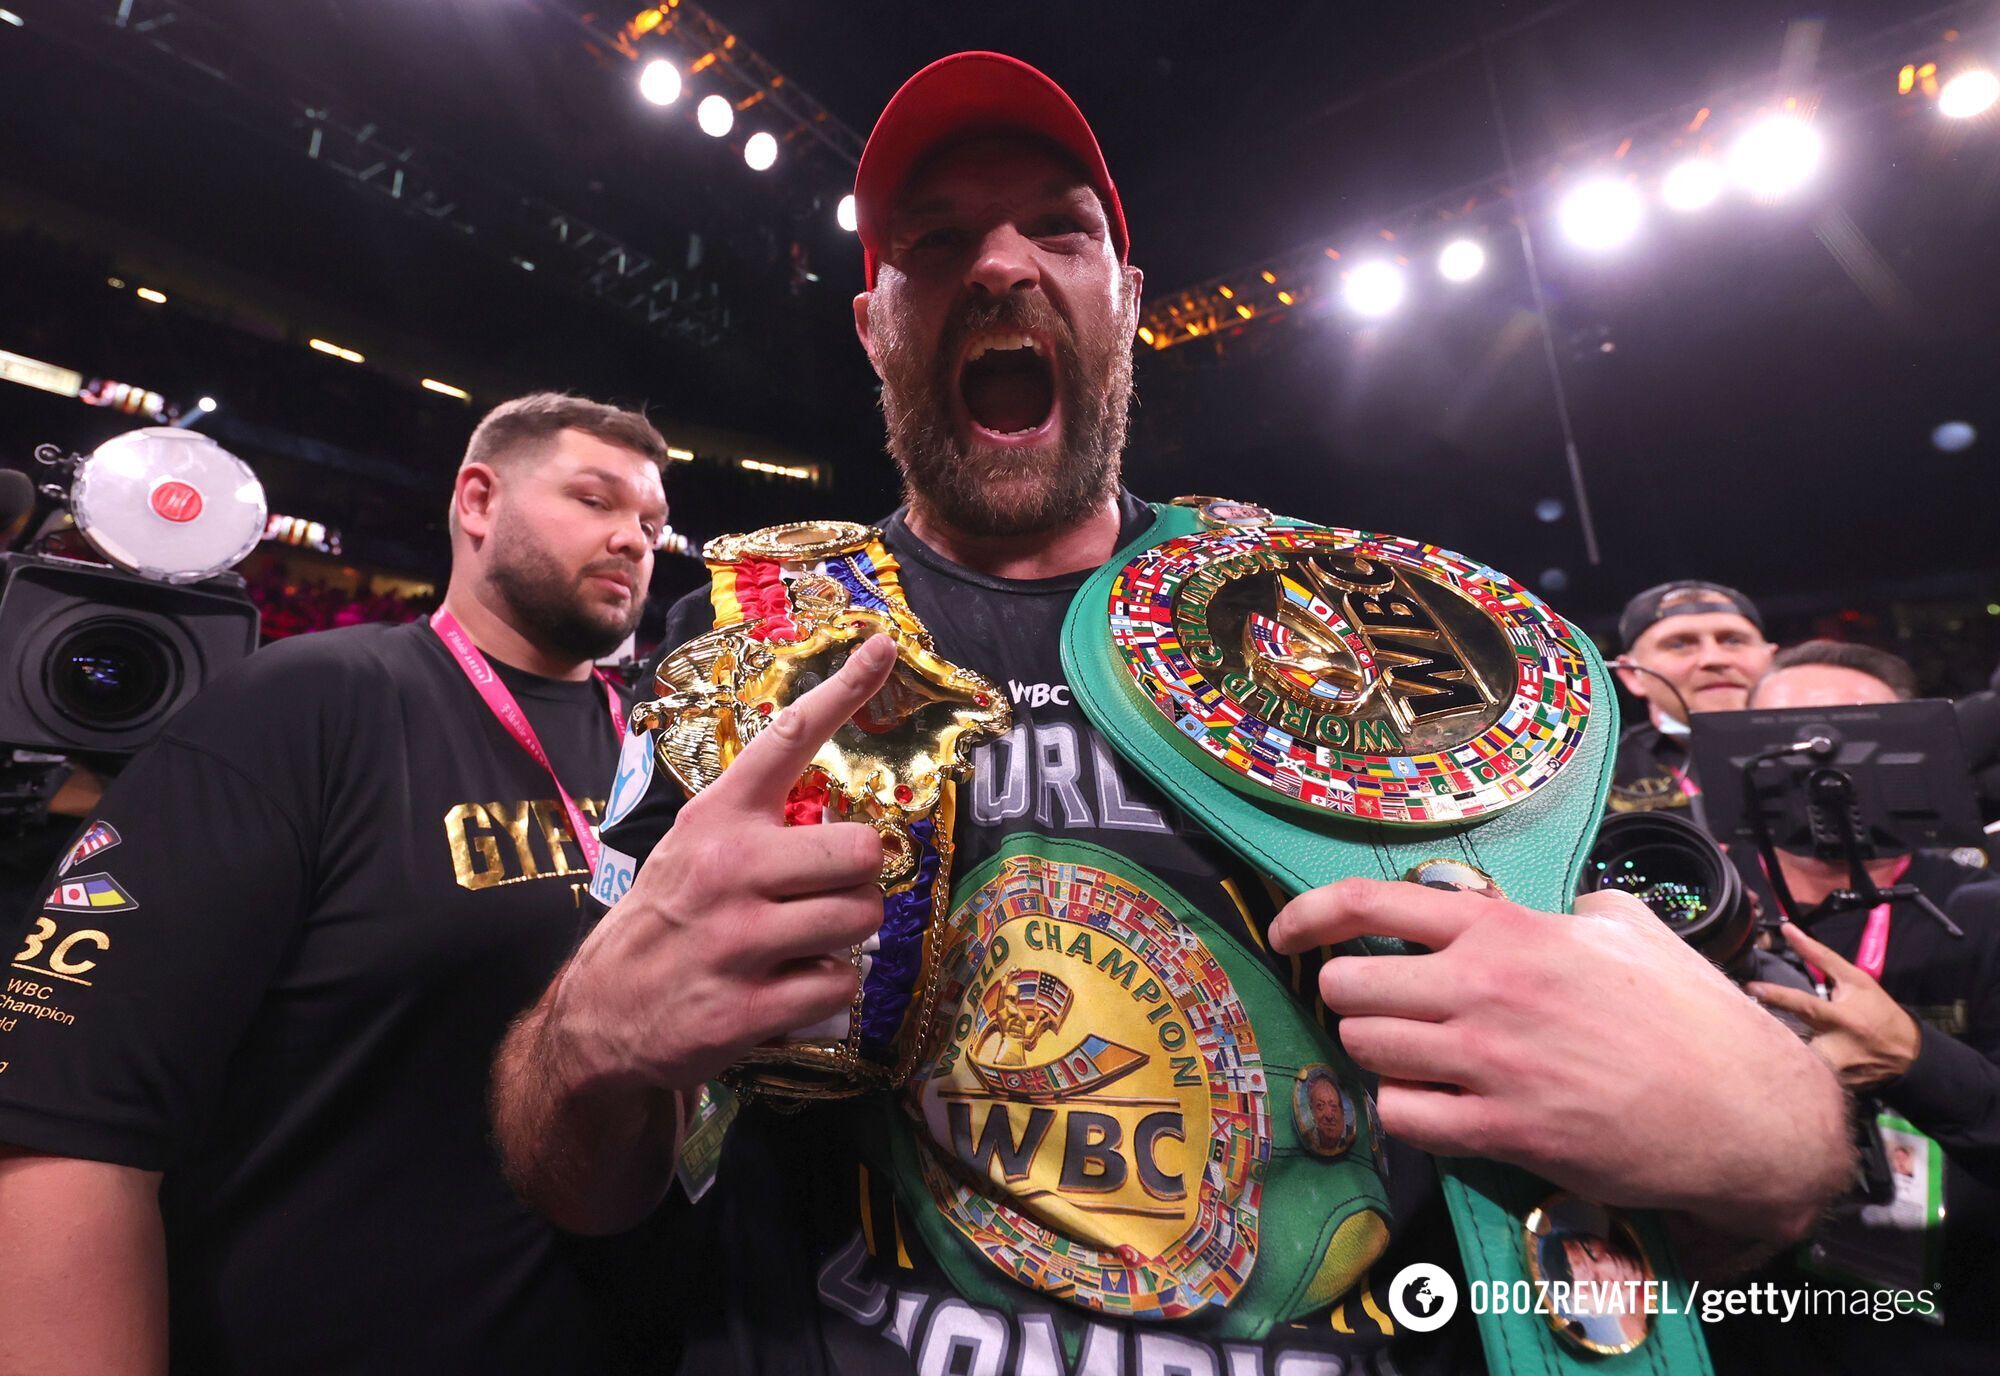 Will Fury be stripped of his championship belt? The WBC made a categorical statement